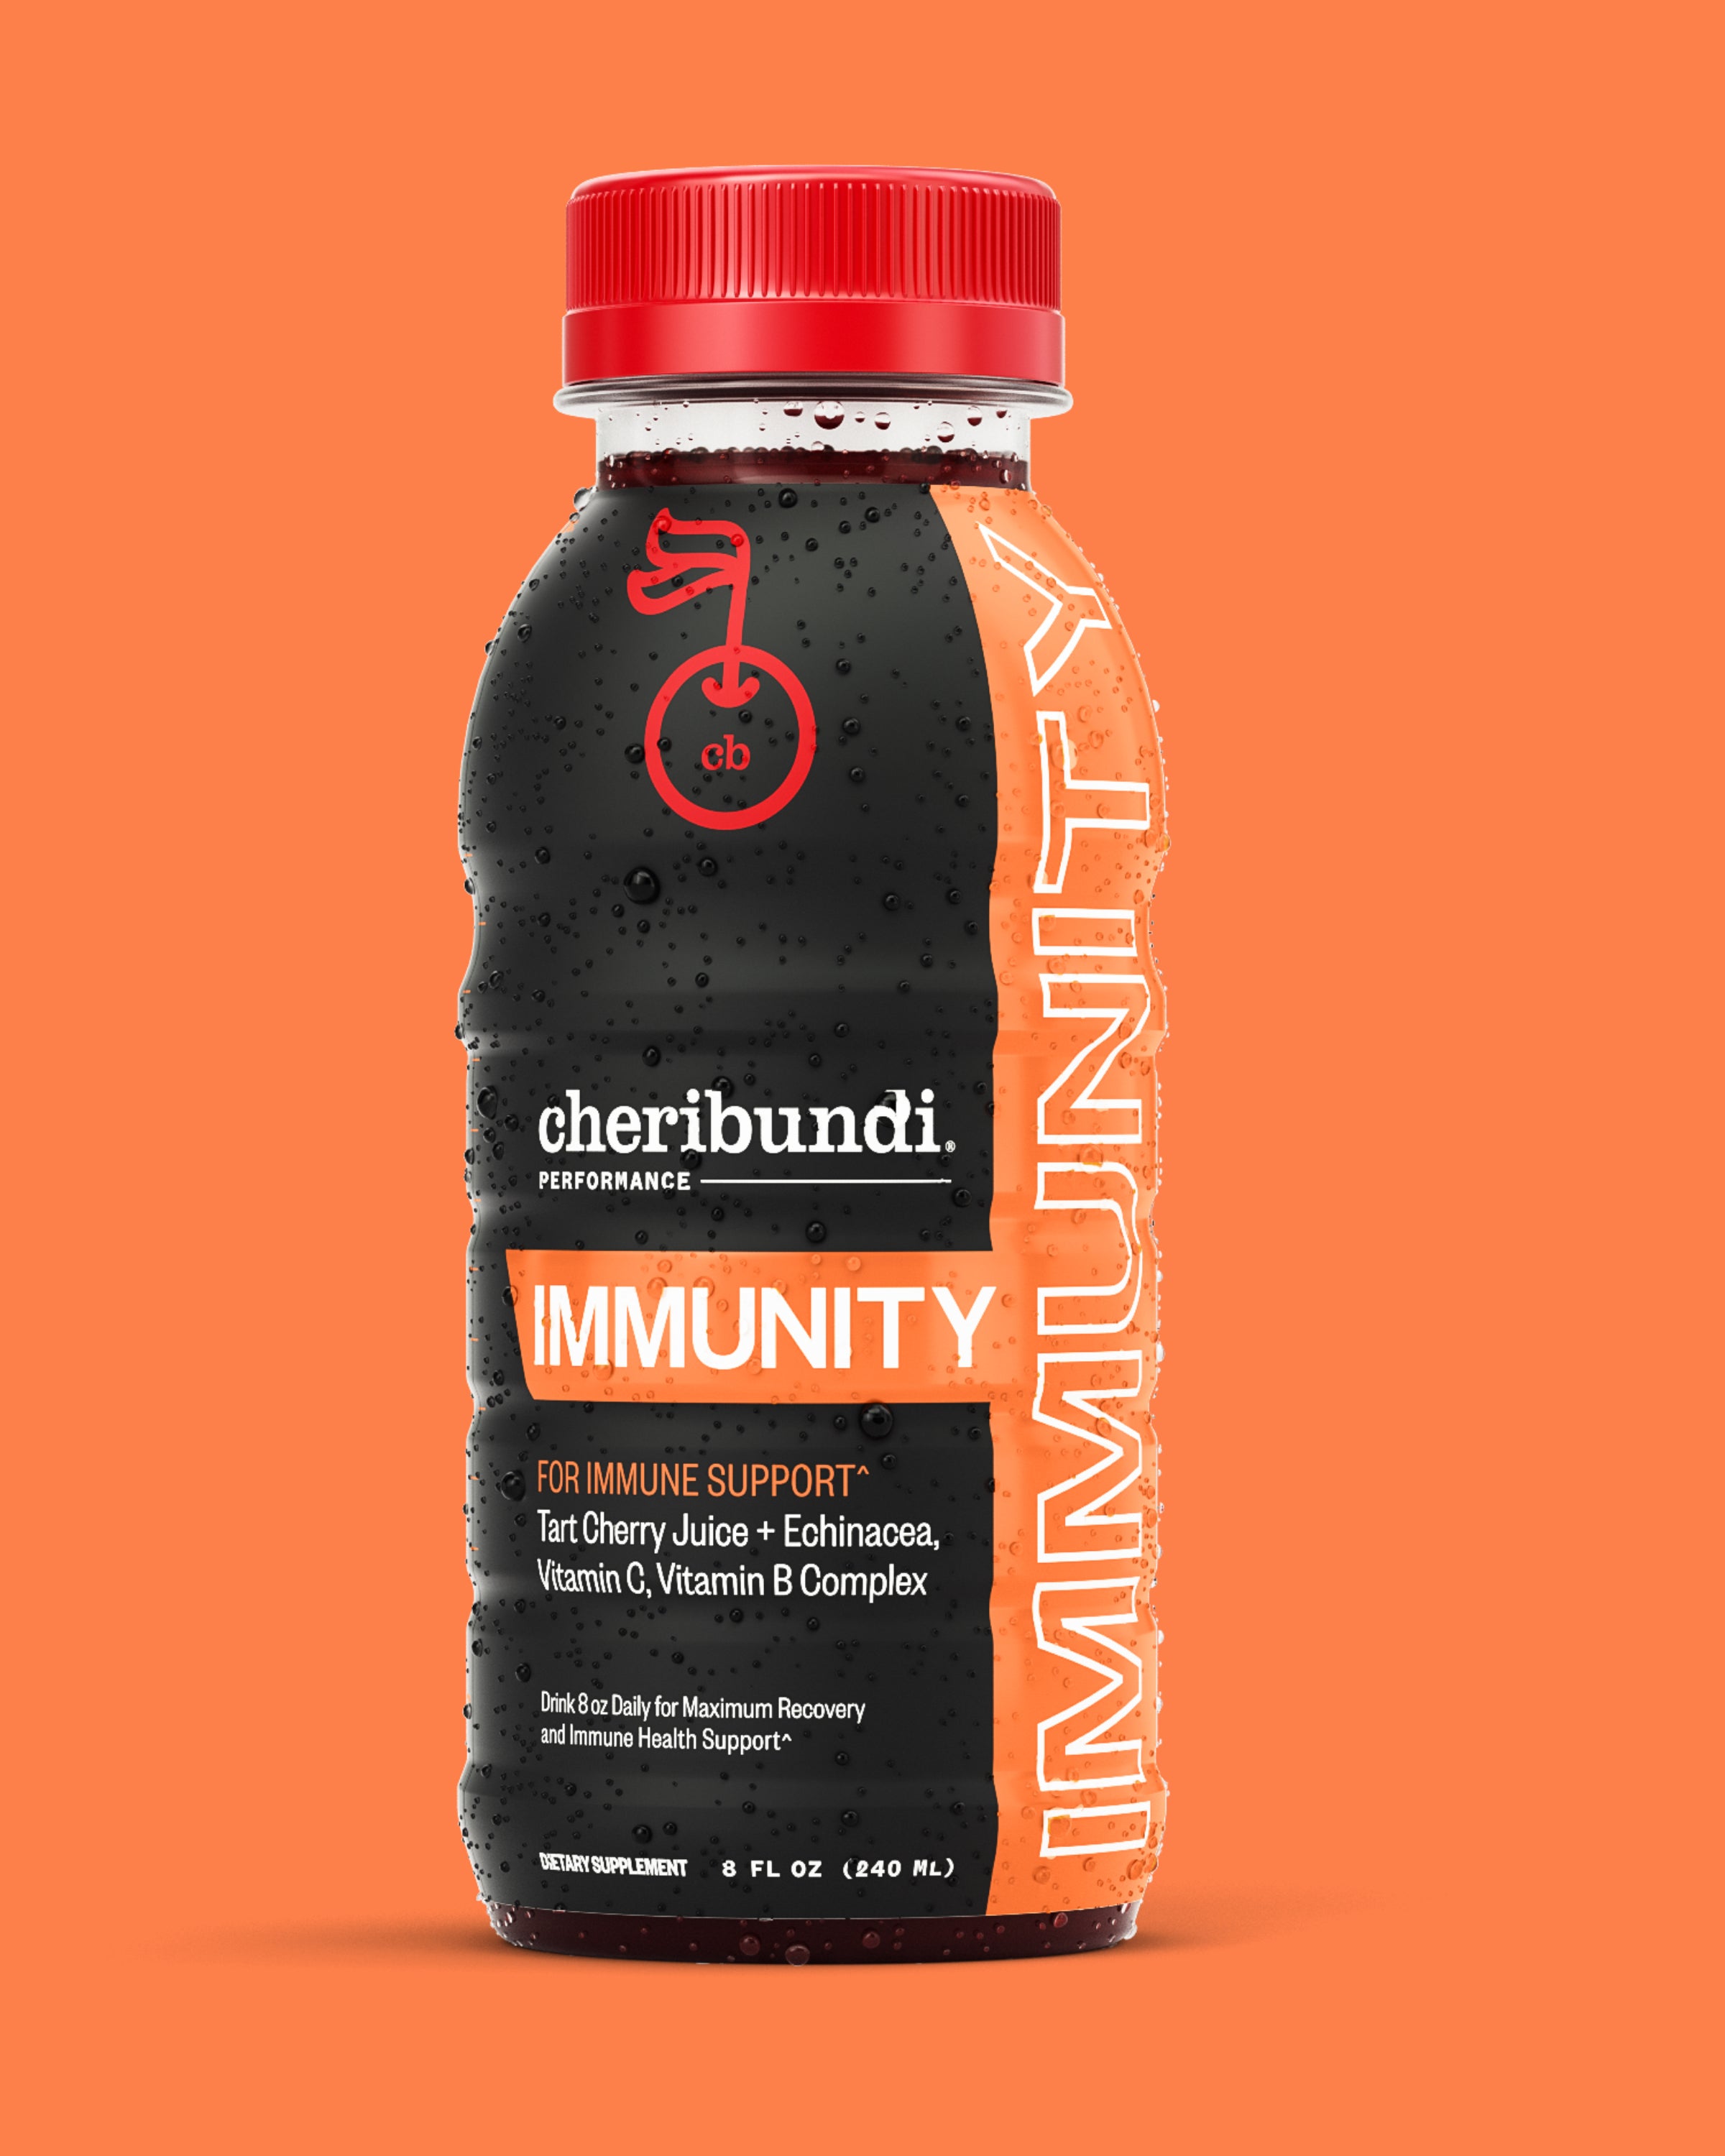 Immunity front packaging